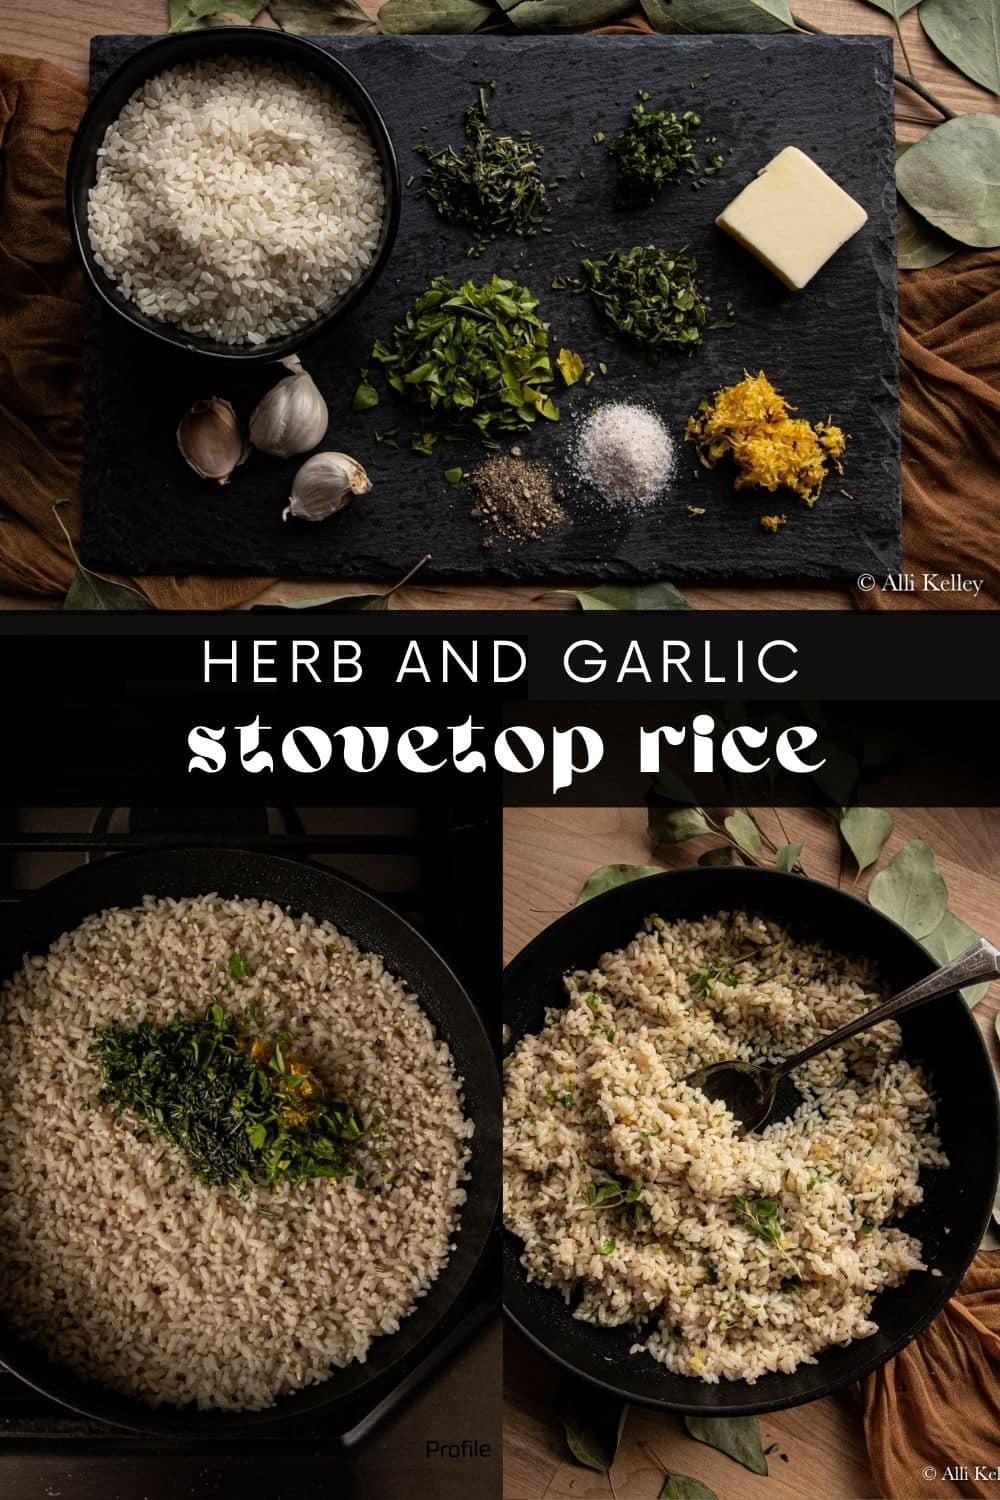 Garlic and herb rice is the perfect side dish for any occasion! The tasty combination of fragrant herbs, garlic, butter, and rice will add a delicious burst of flavor to your meal times. Ready in no time at all, this easy-to-make recipe will soon be your go-to side dish.